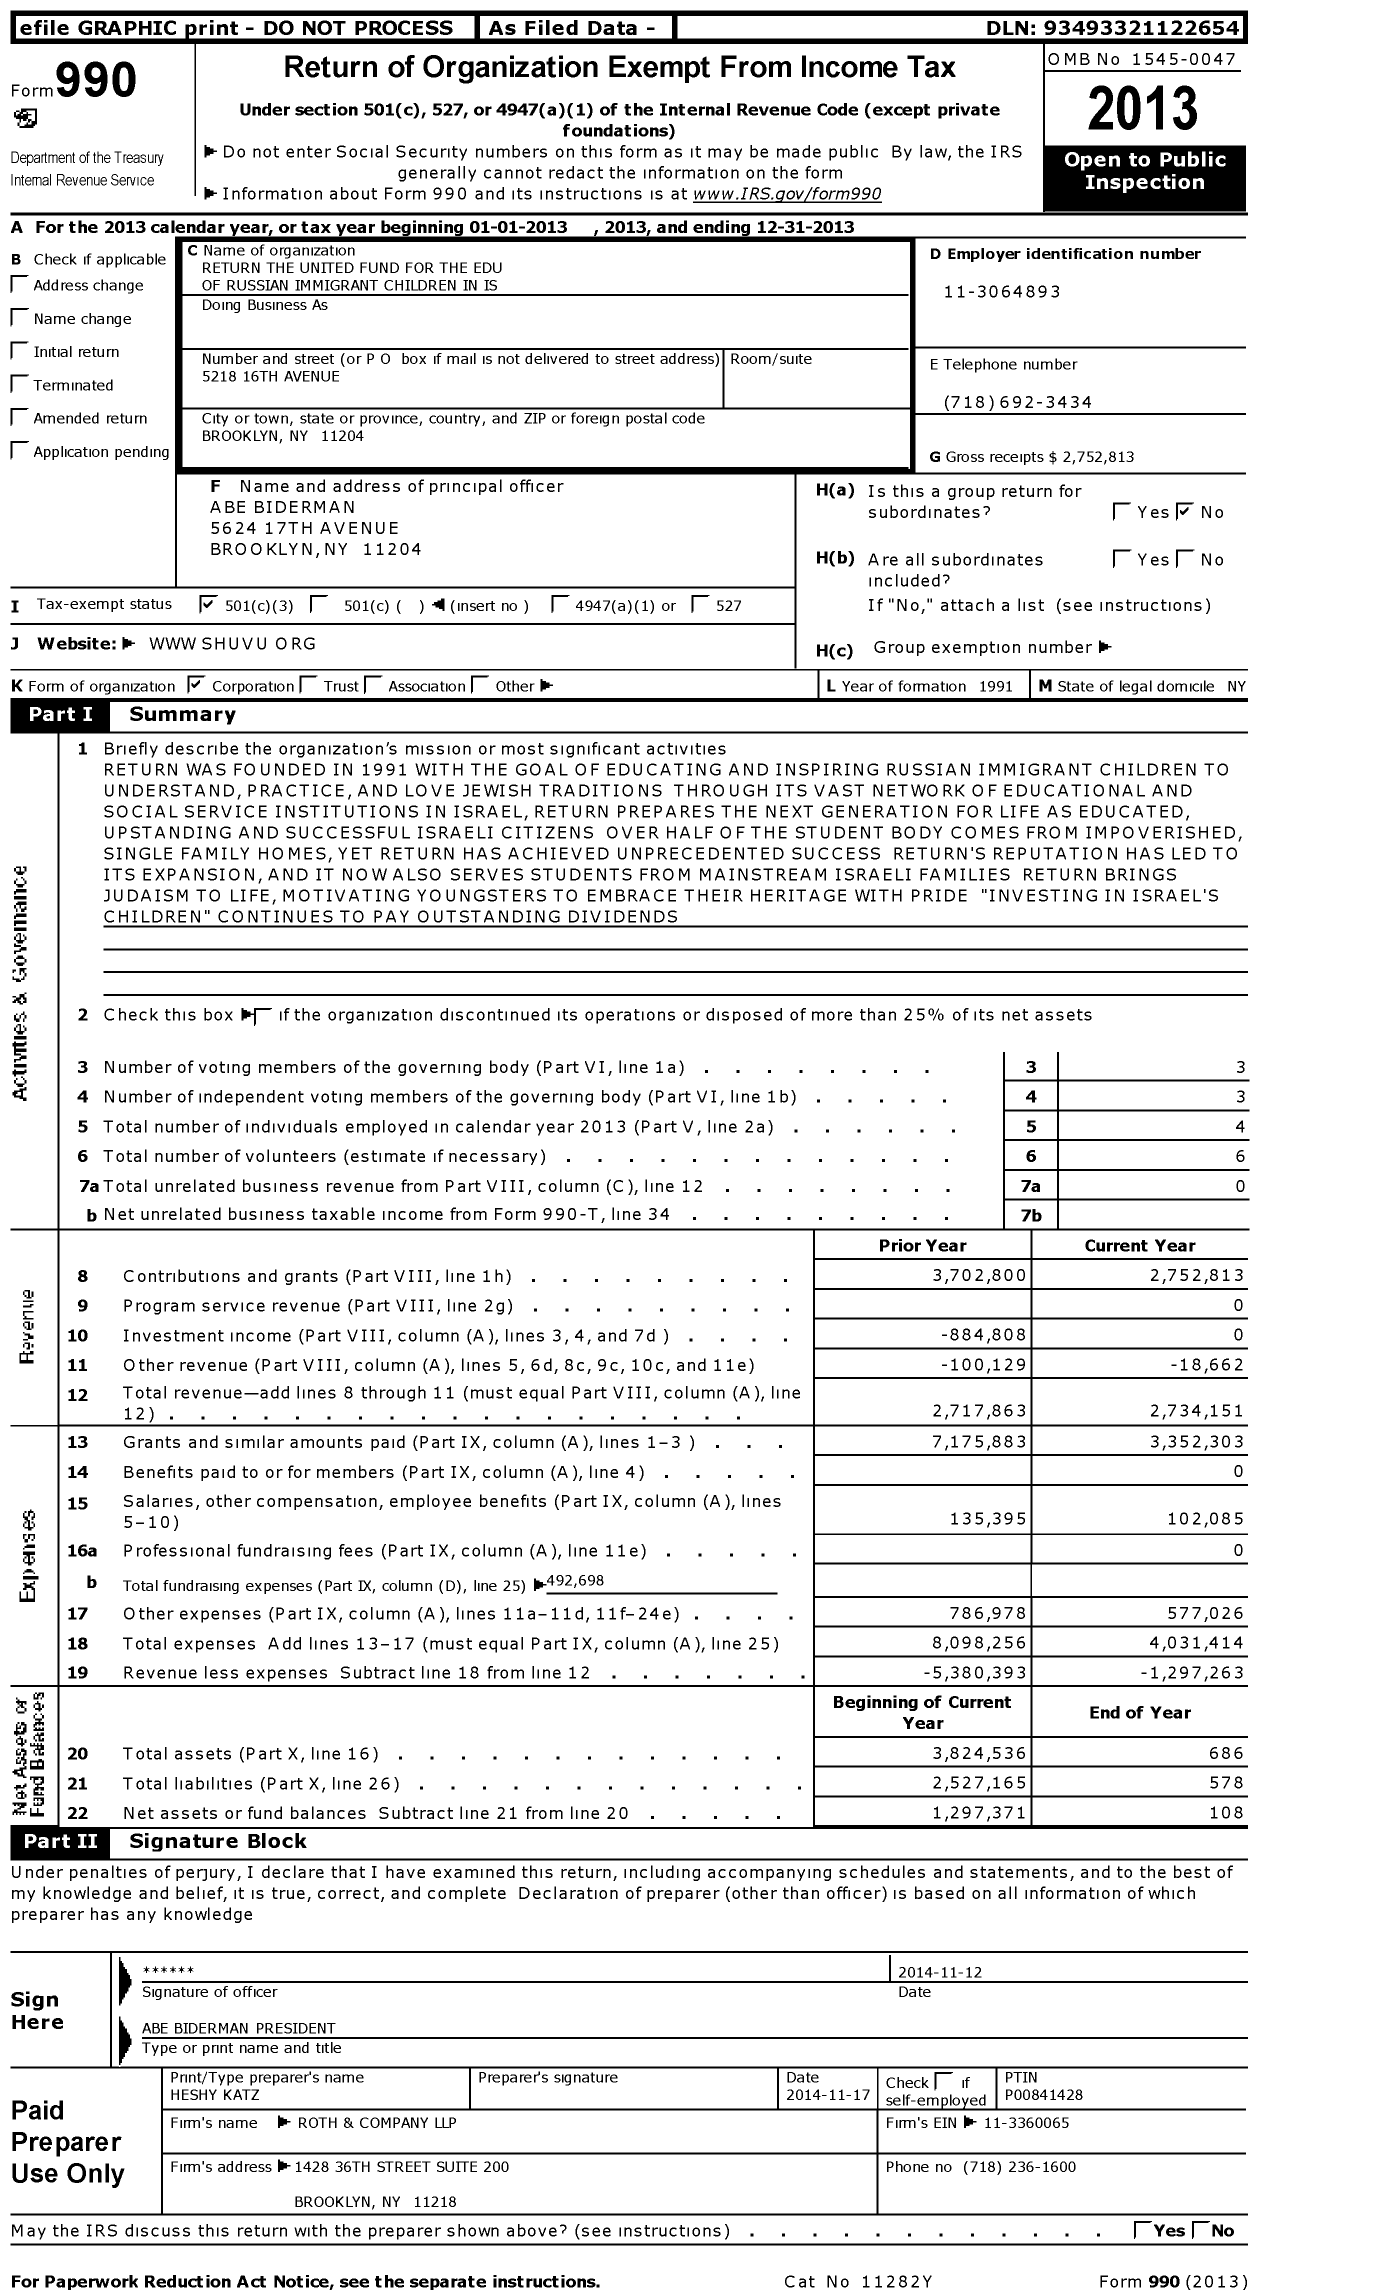 Image of first page of 2013 Form 990 for Return the United Fund for the Edu of Russian Immigrant Children in Is